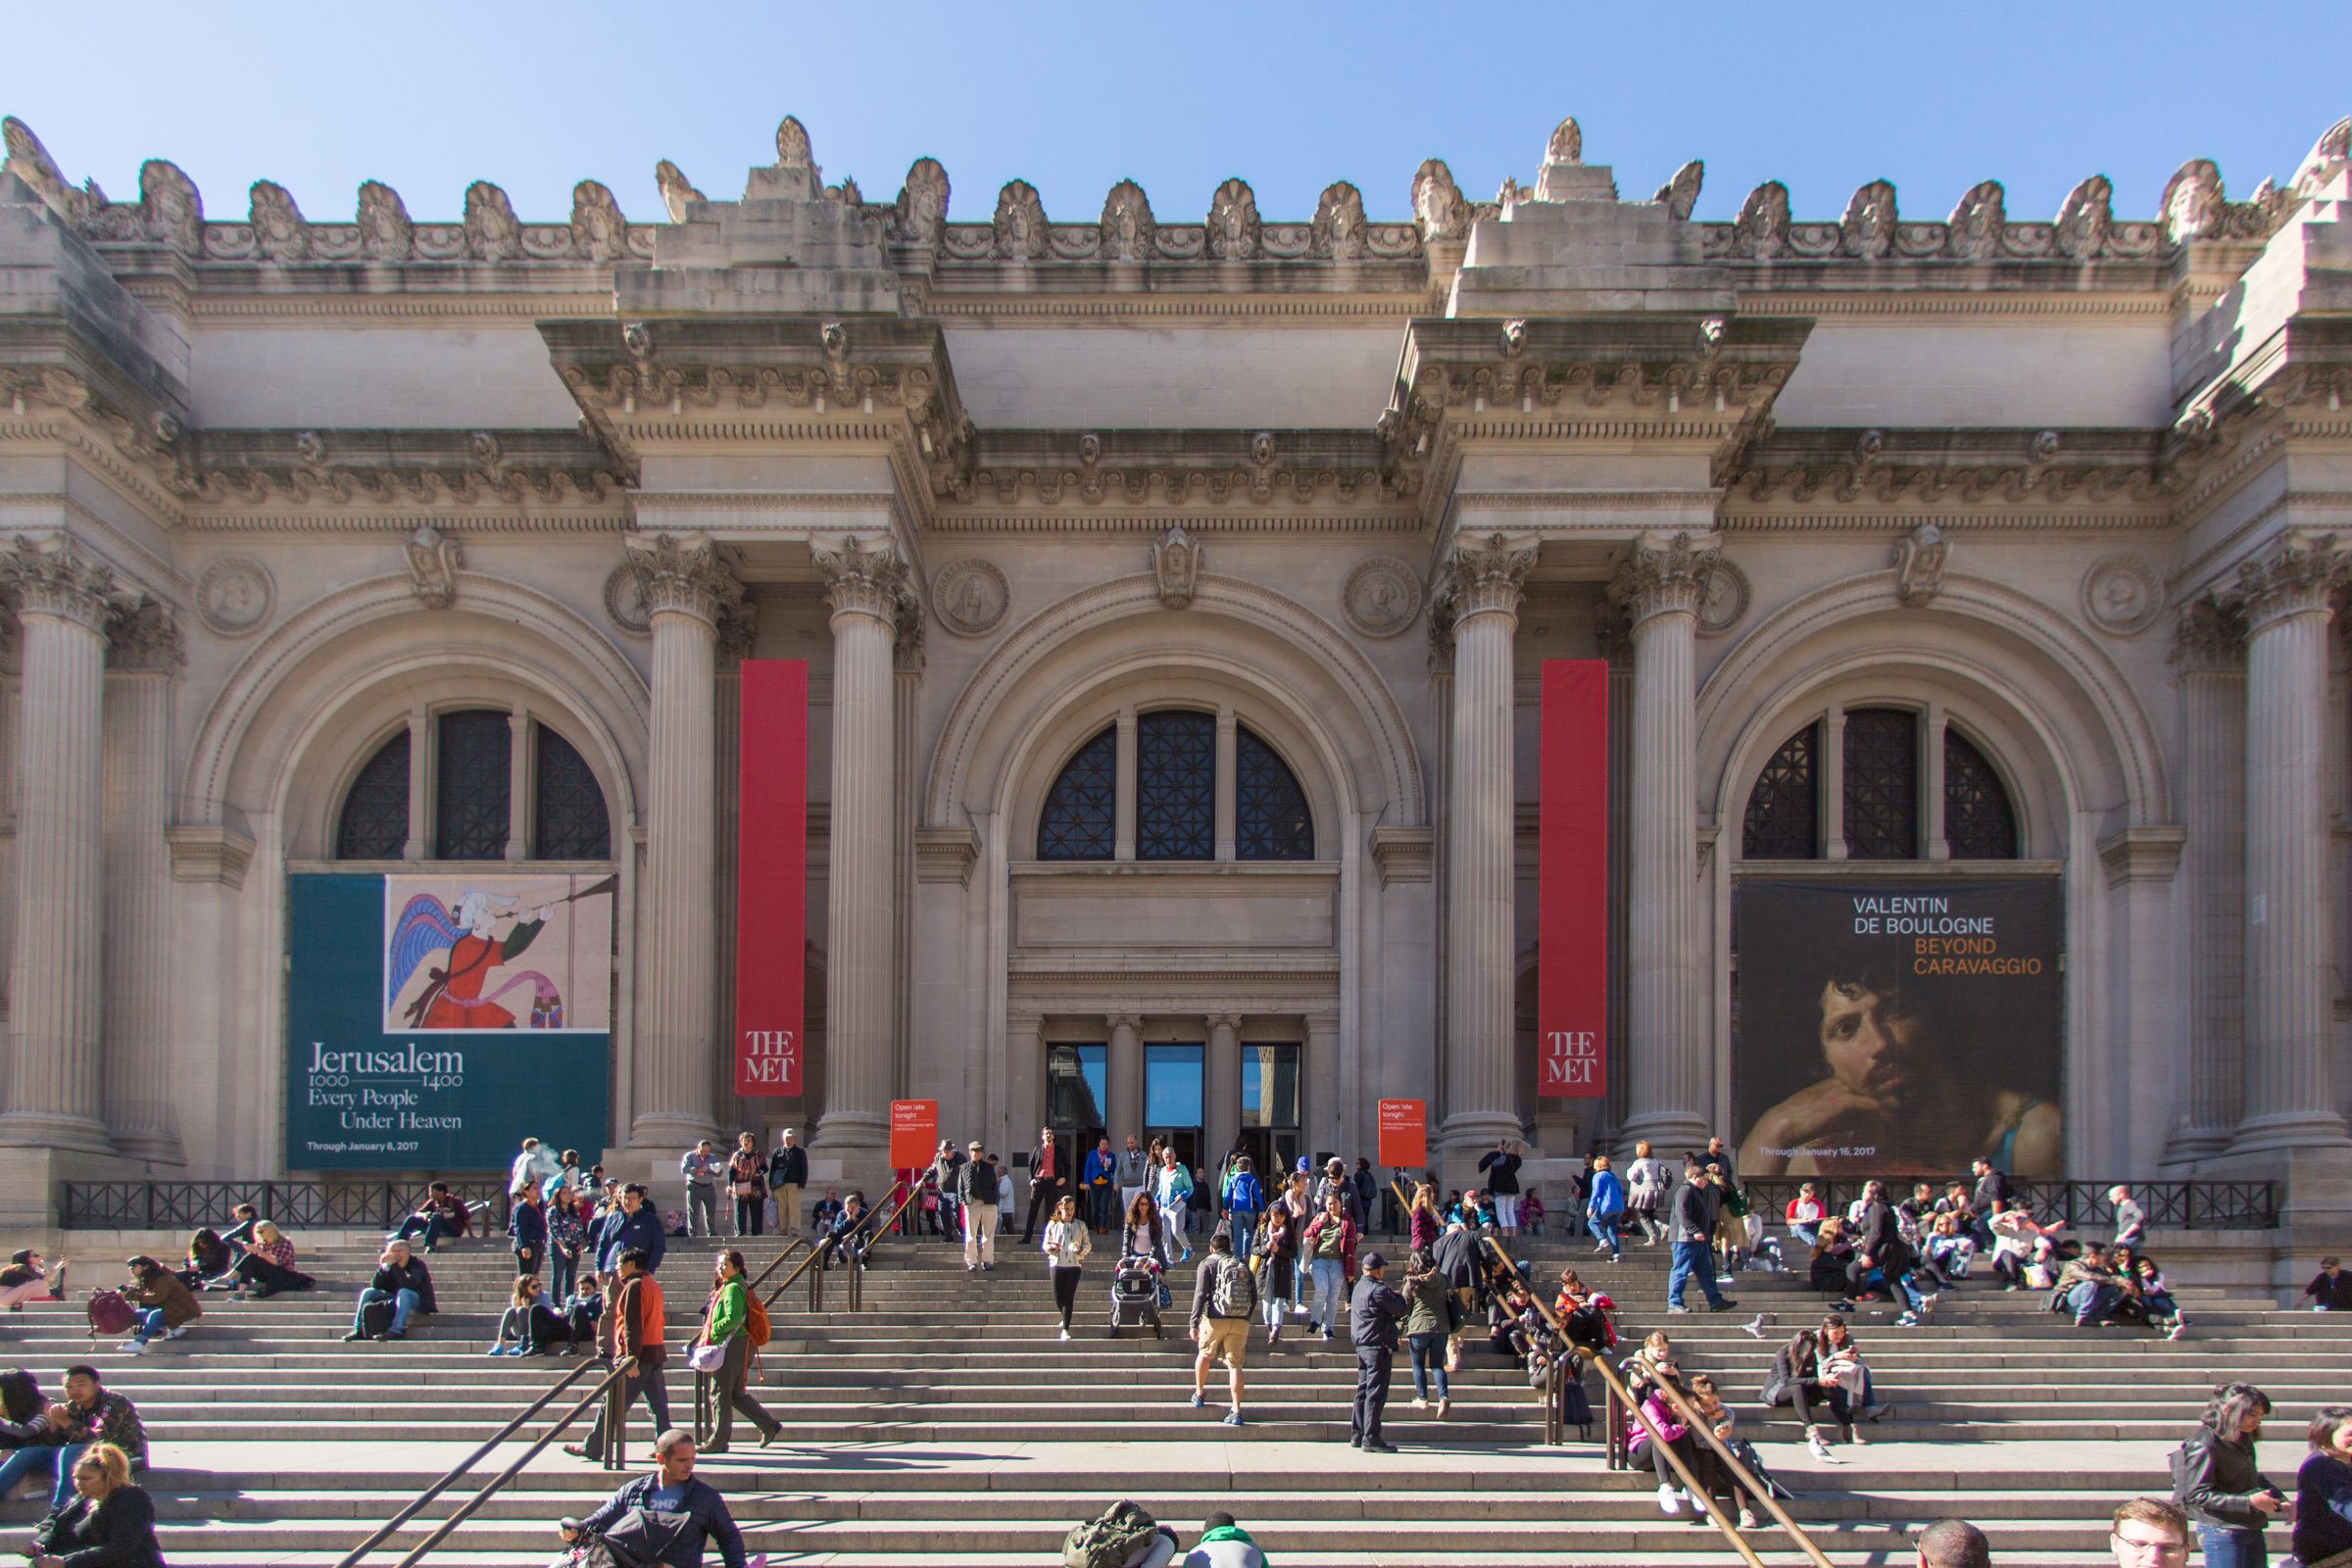 For the First Time in Its History, the Metropolitan Museum of Art Will